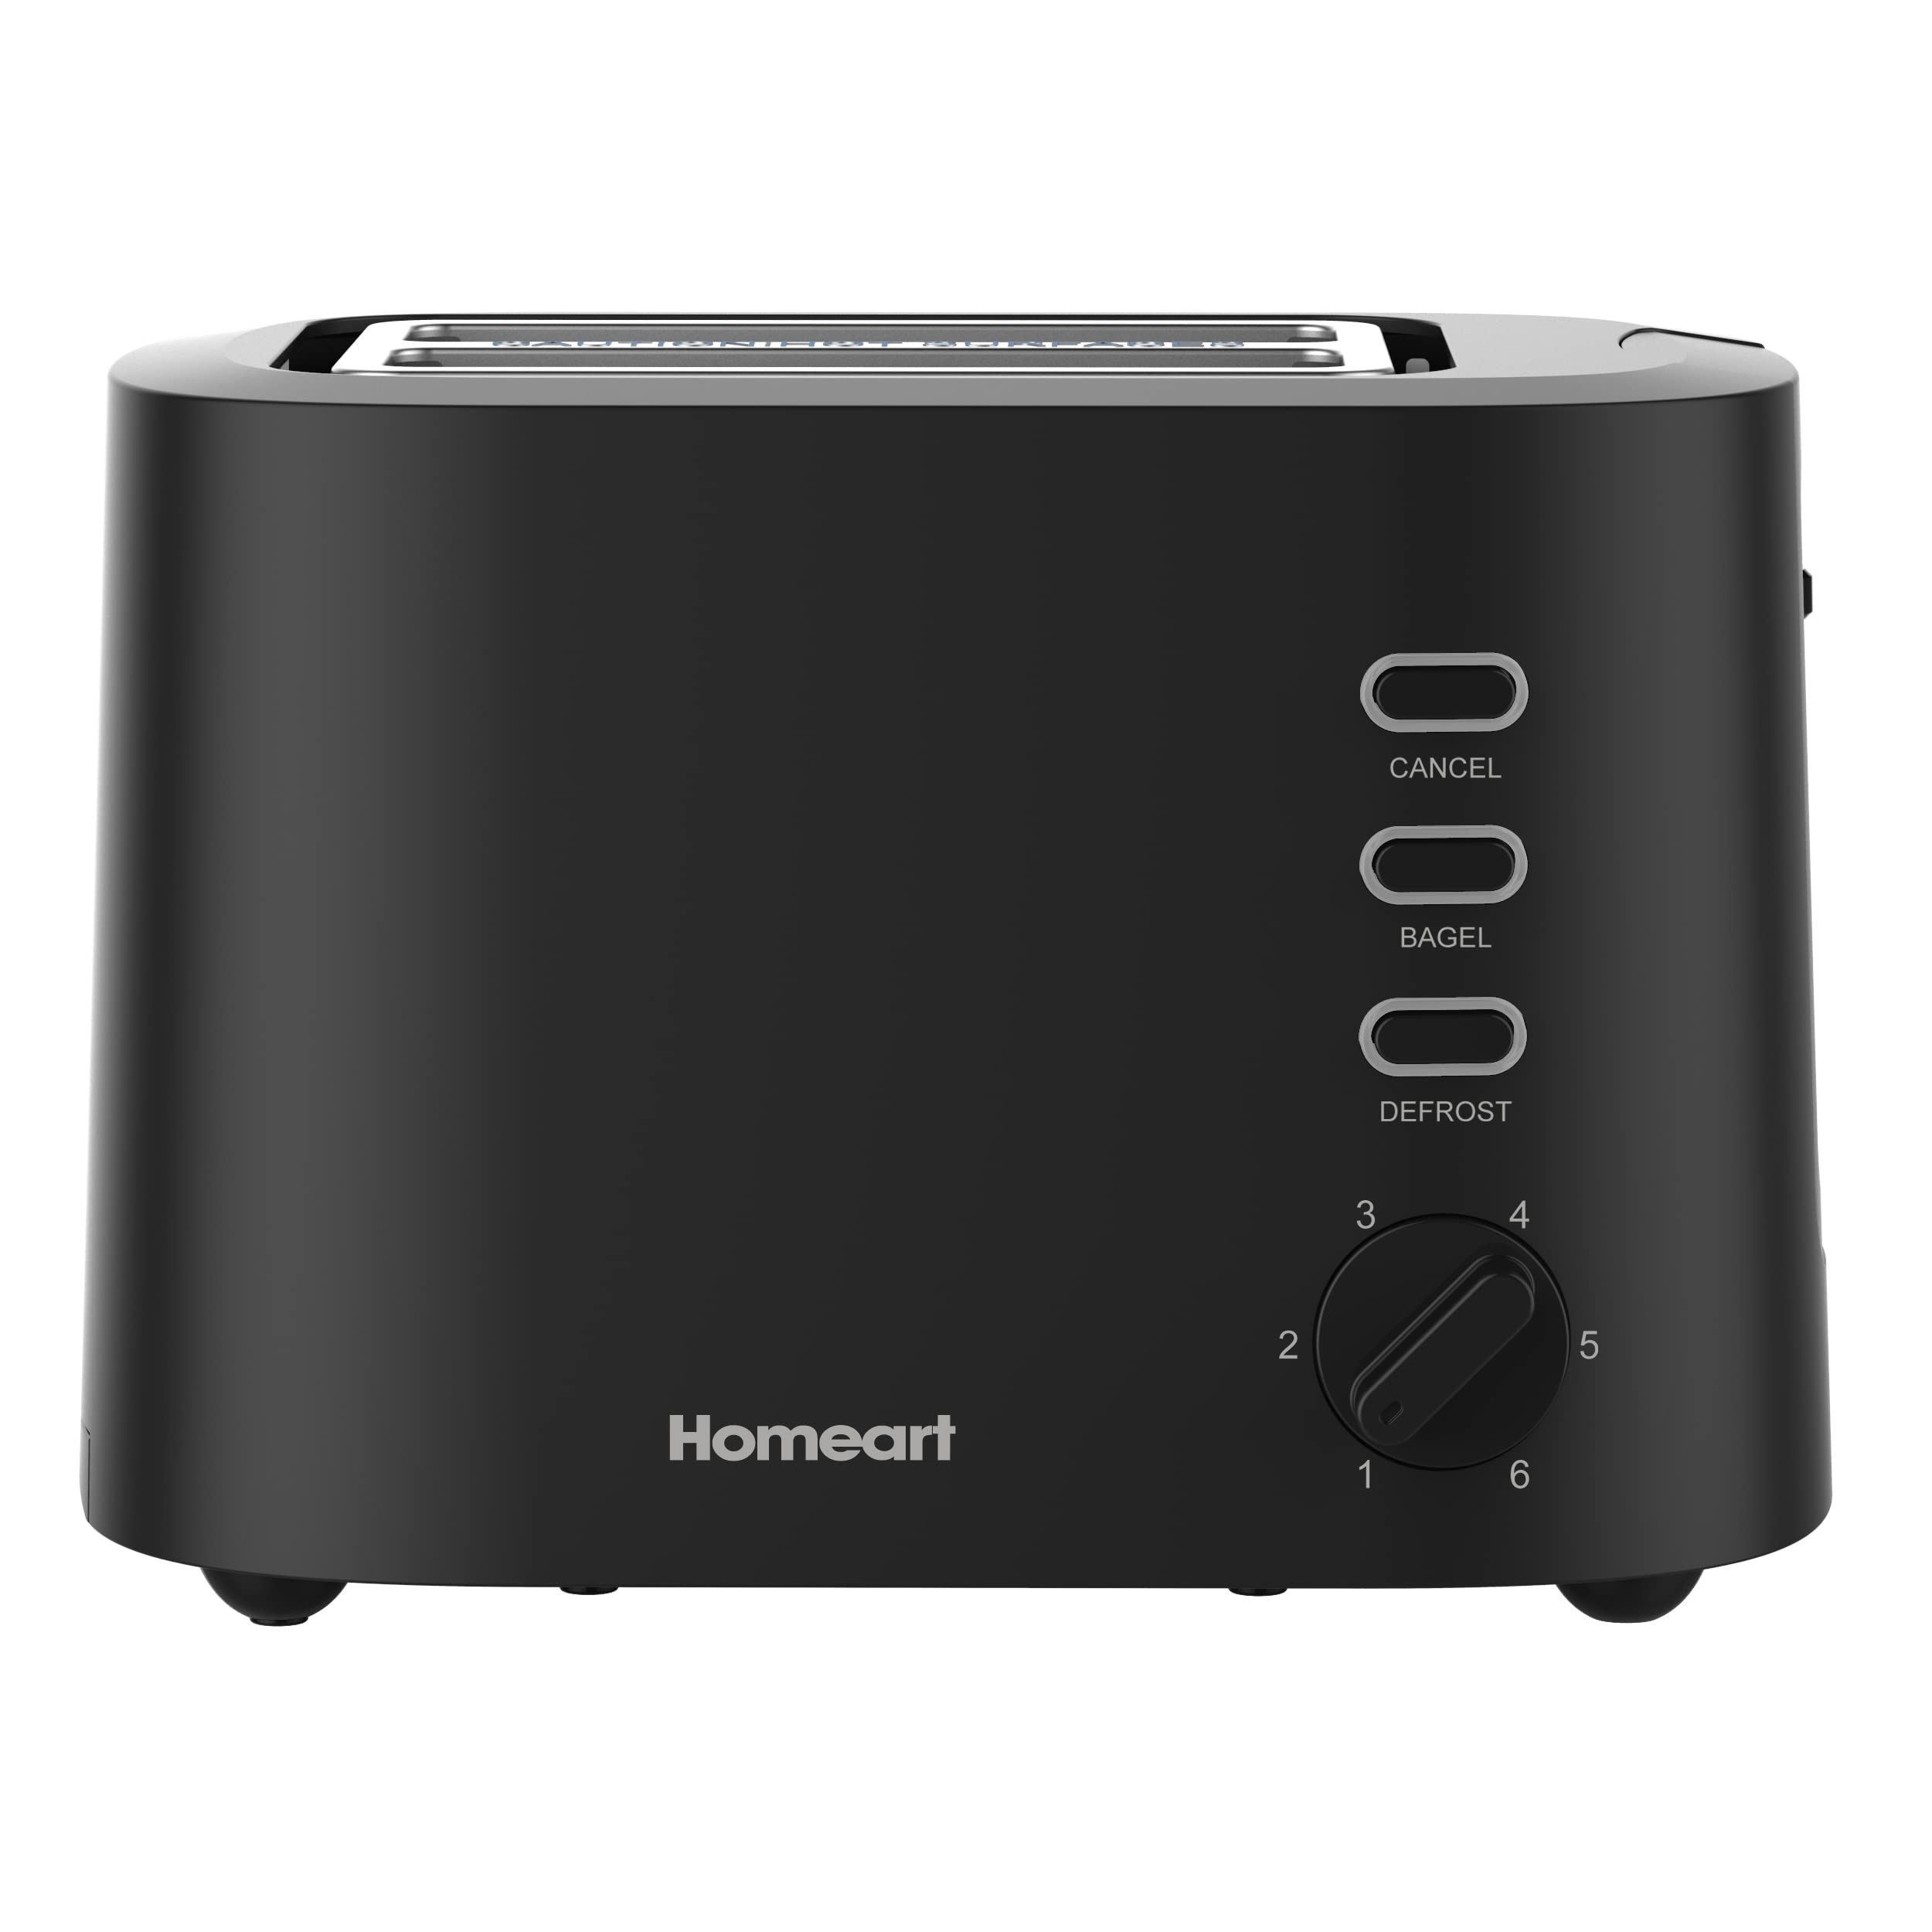 Homeart 900W Staple 2-Slice Toaster - Stainless Steel With Removable Crumb Tray, Adjustable Browning Control, Defrost and Bagel